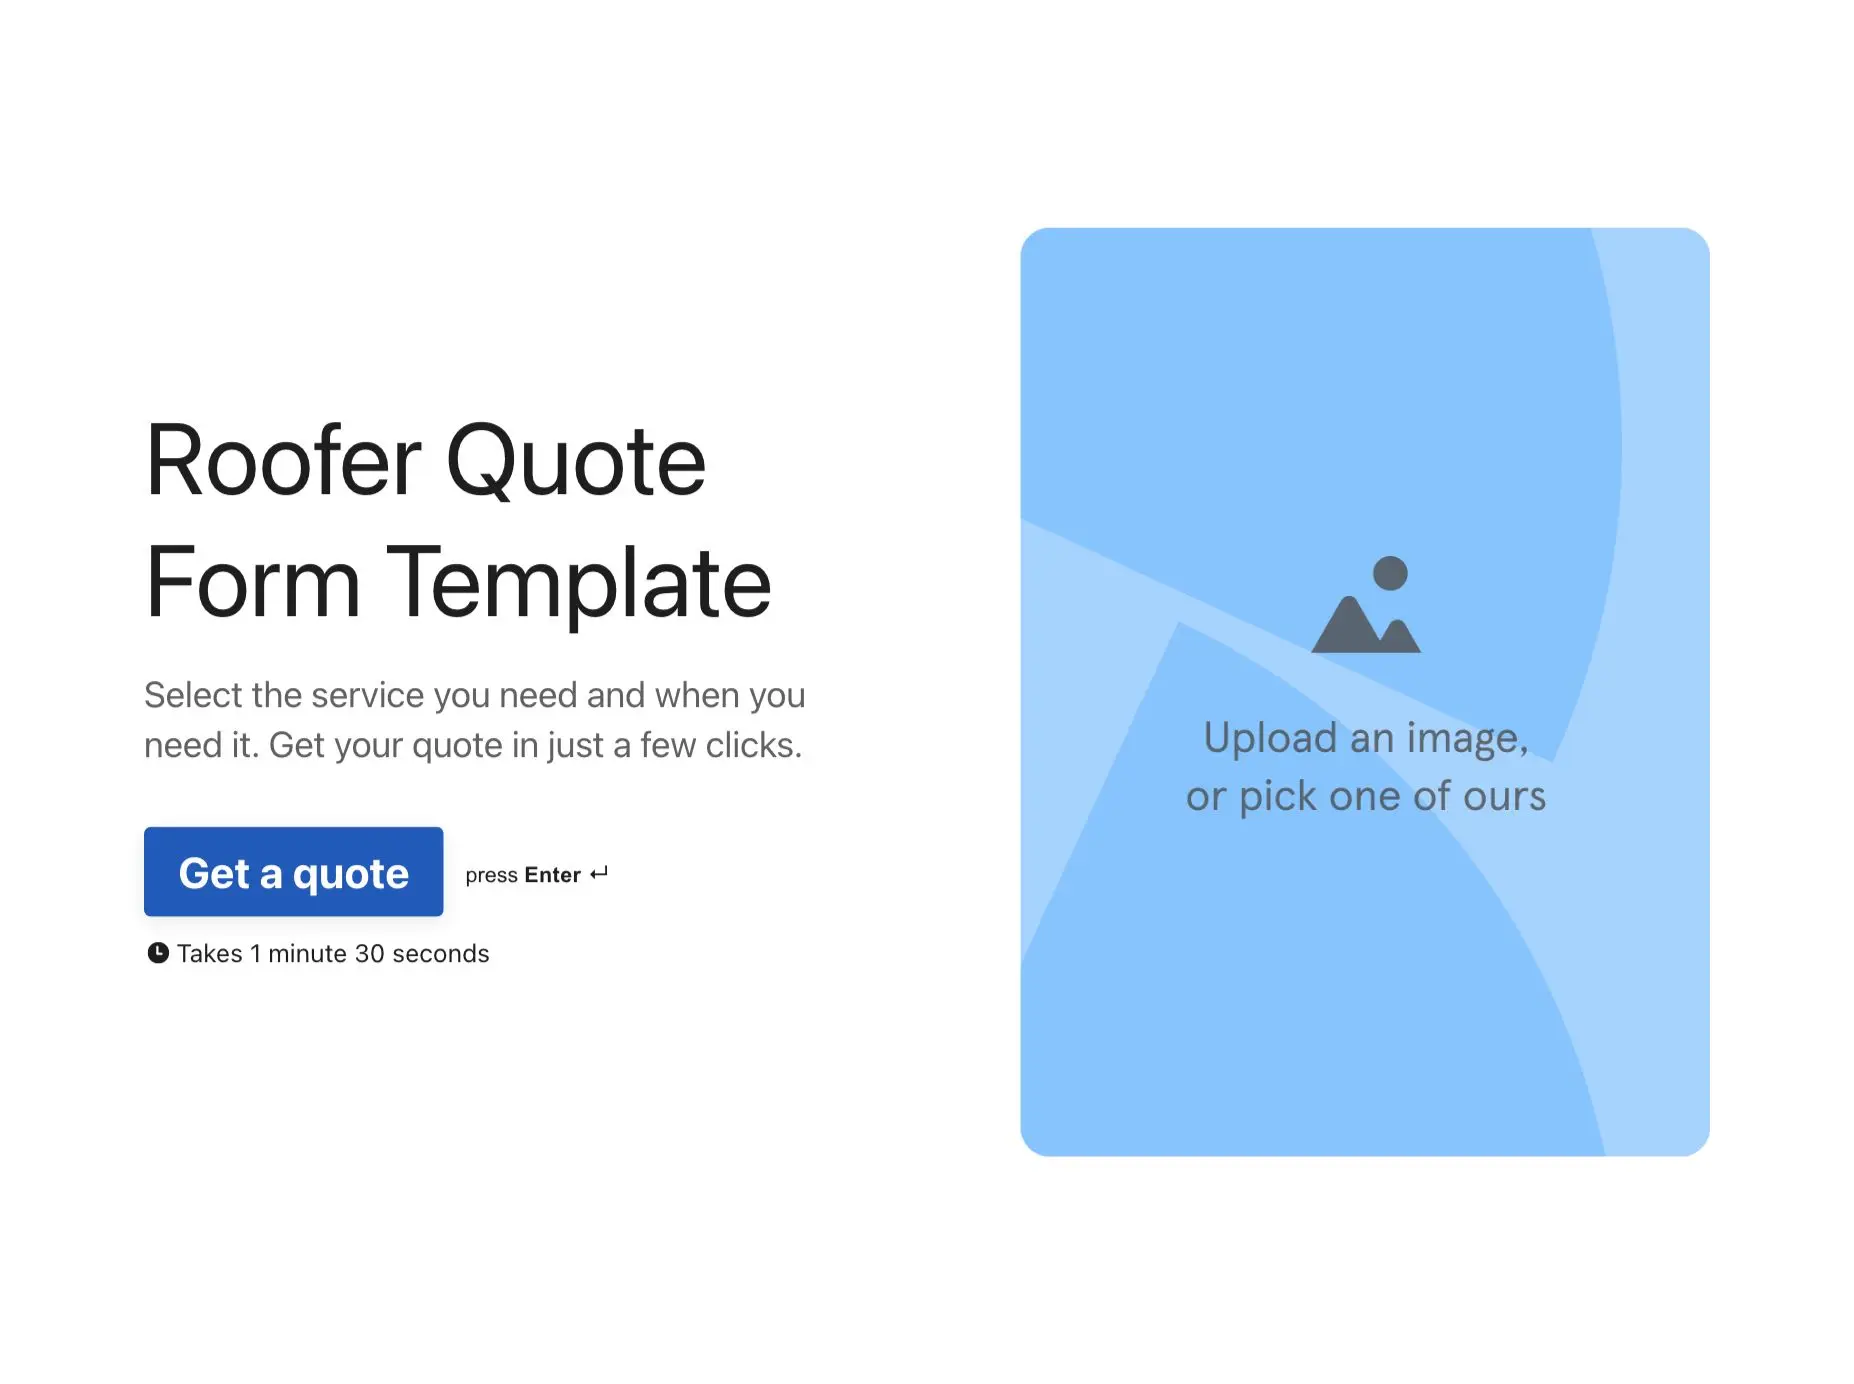 Roofer Quote Form Template Hero